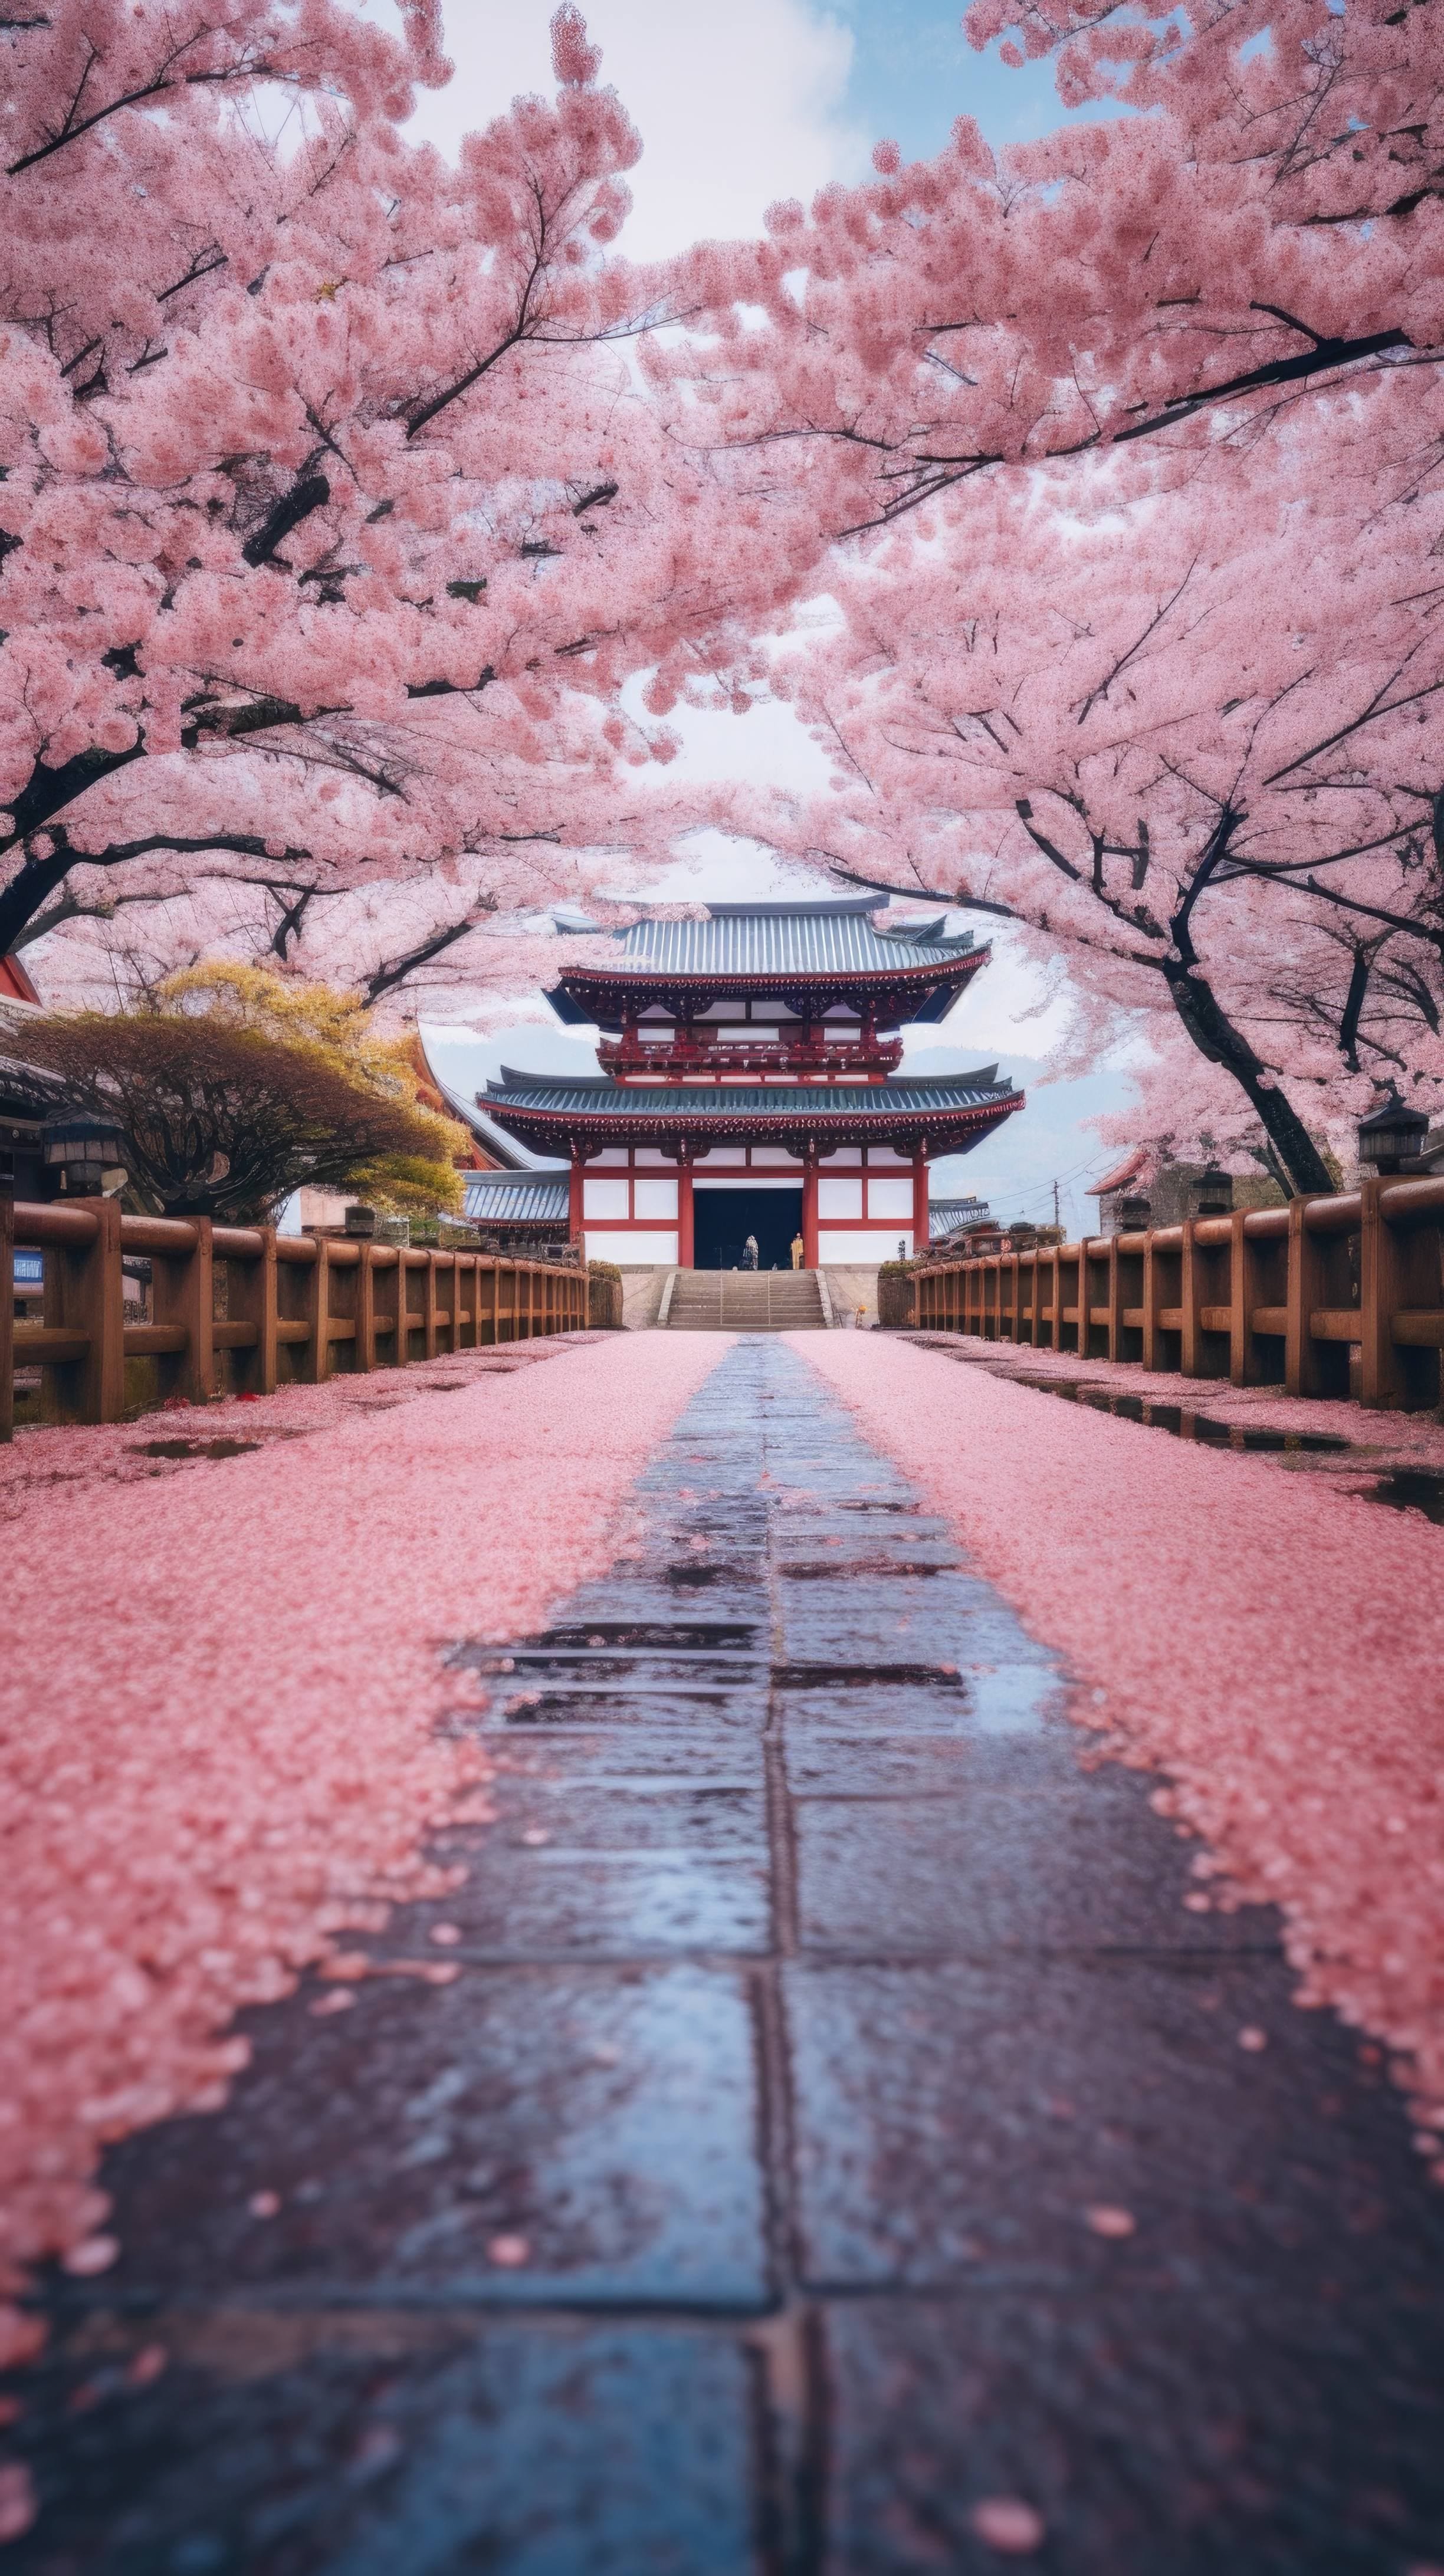 Kyoto temple, cherry blossom serenity, nature's spring masterpiece